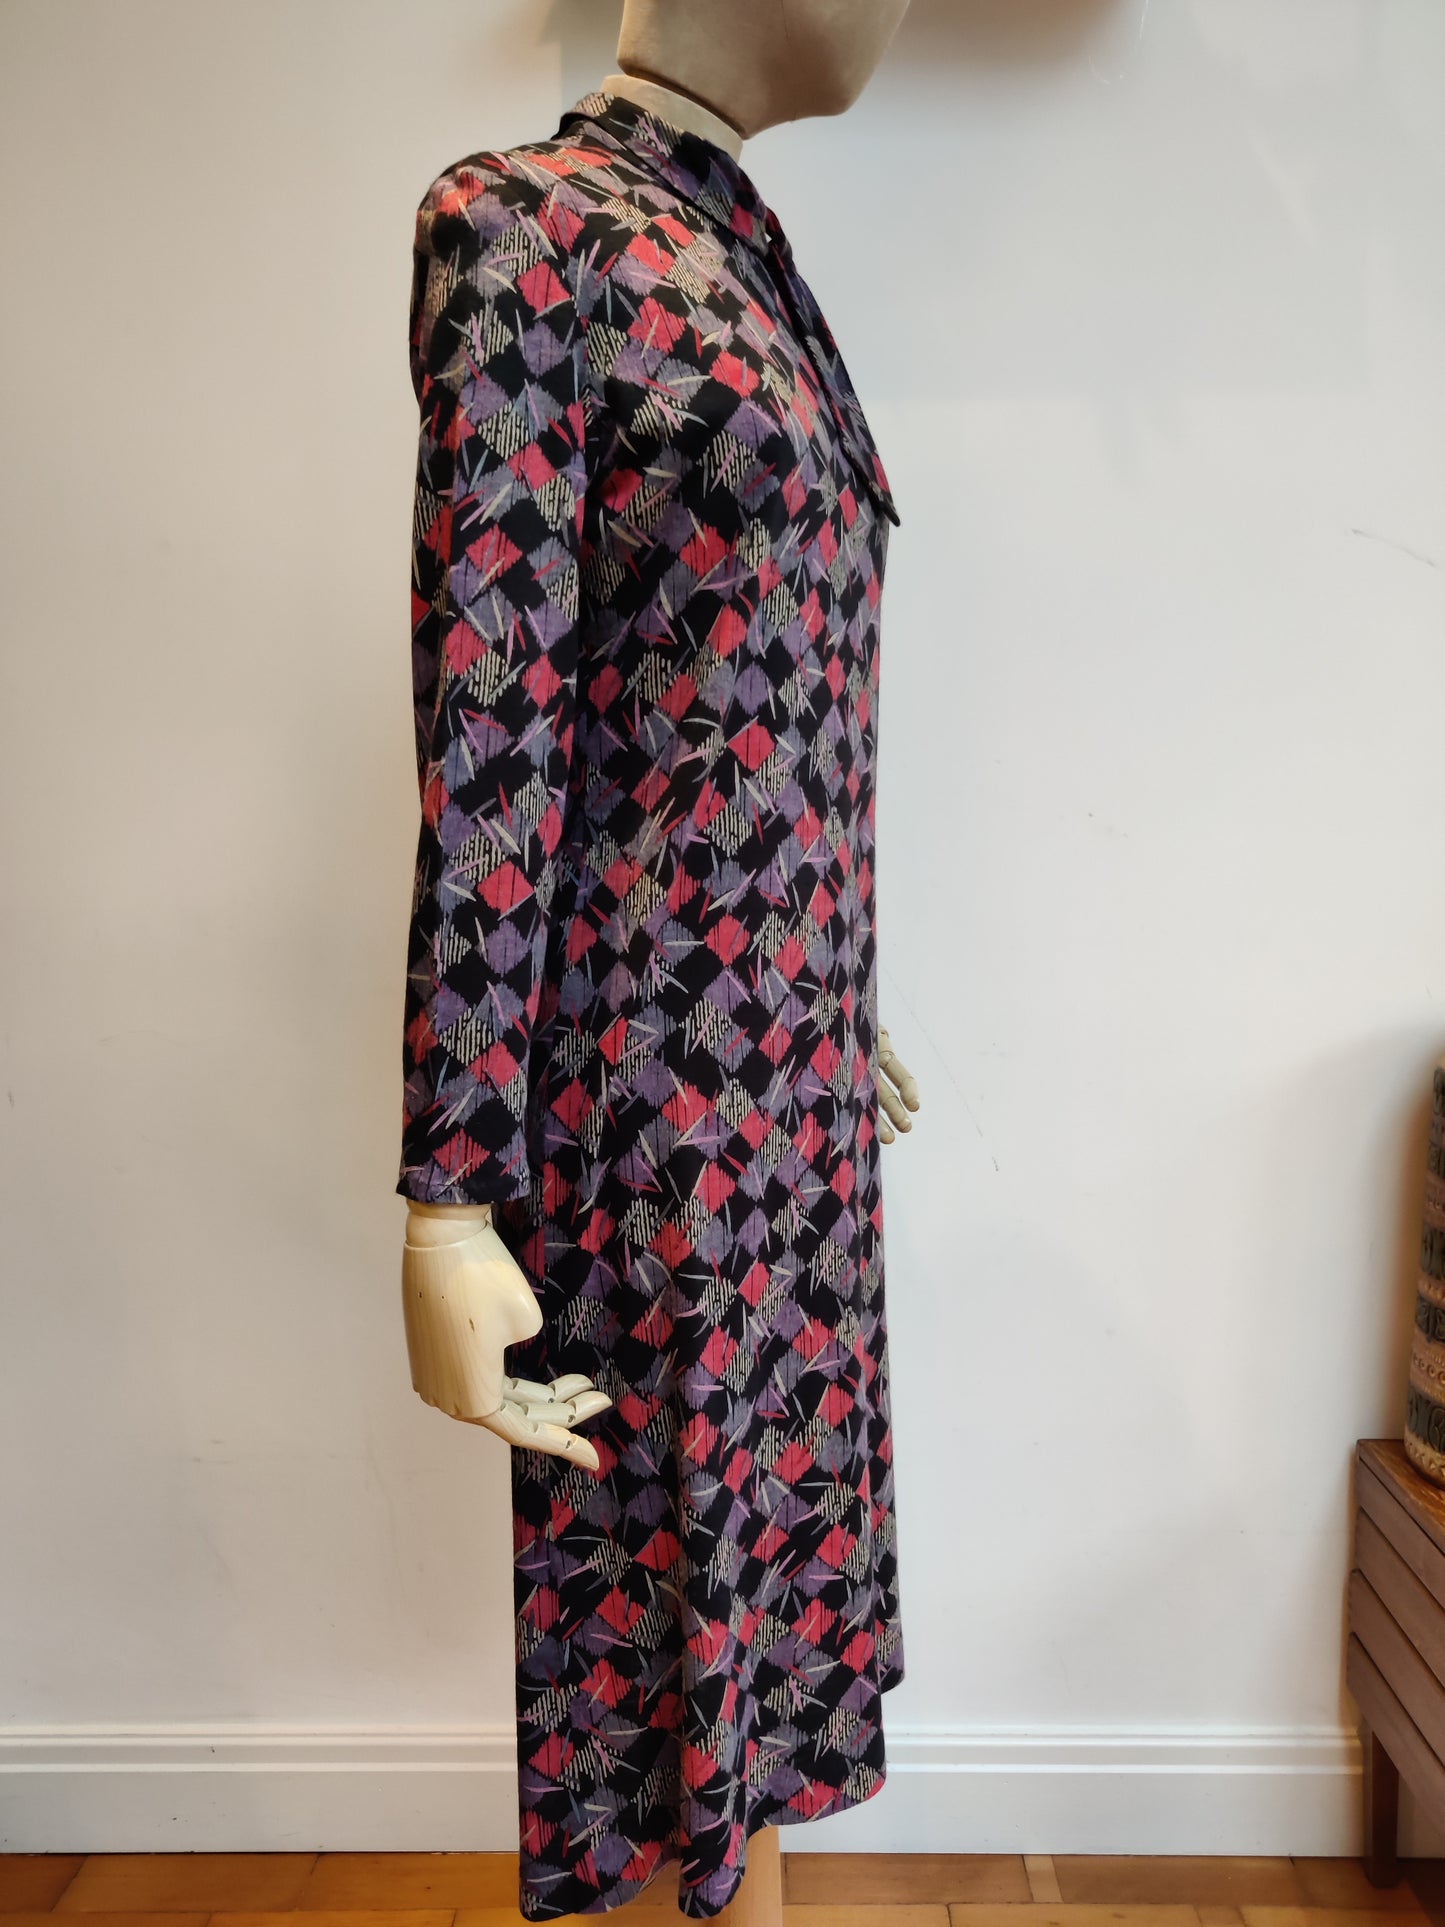 Eastex vintage midi dress with pussy bow neck.